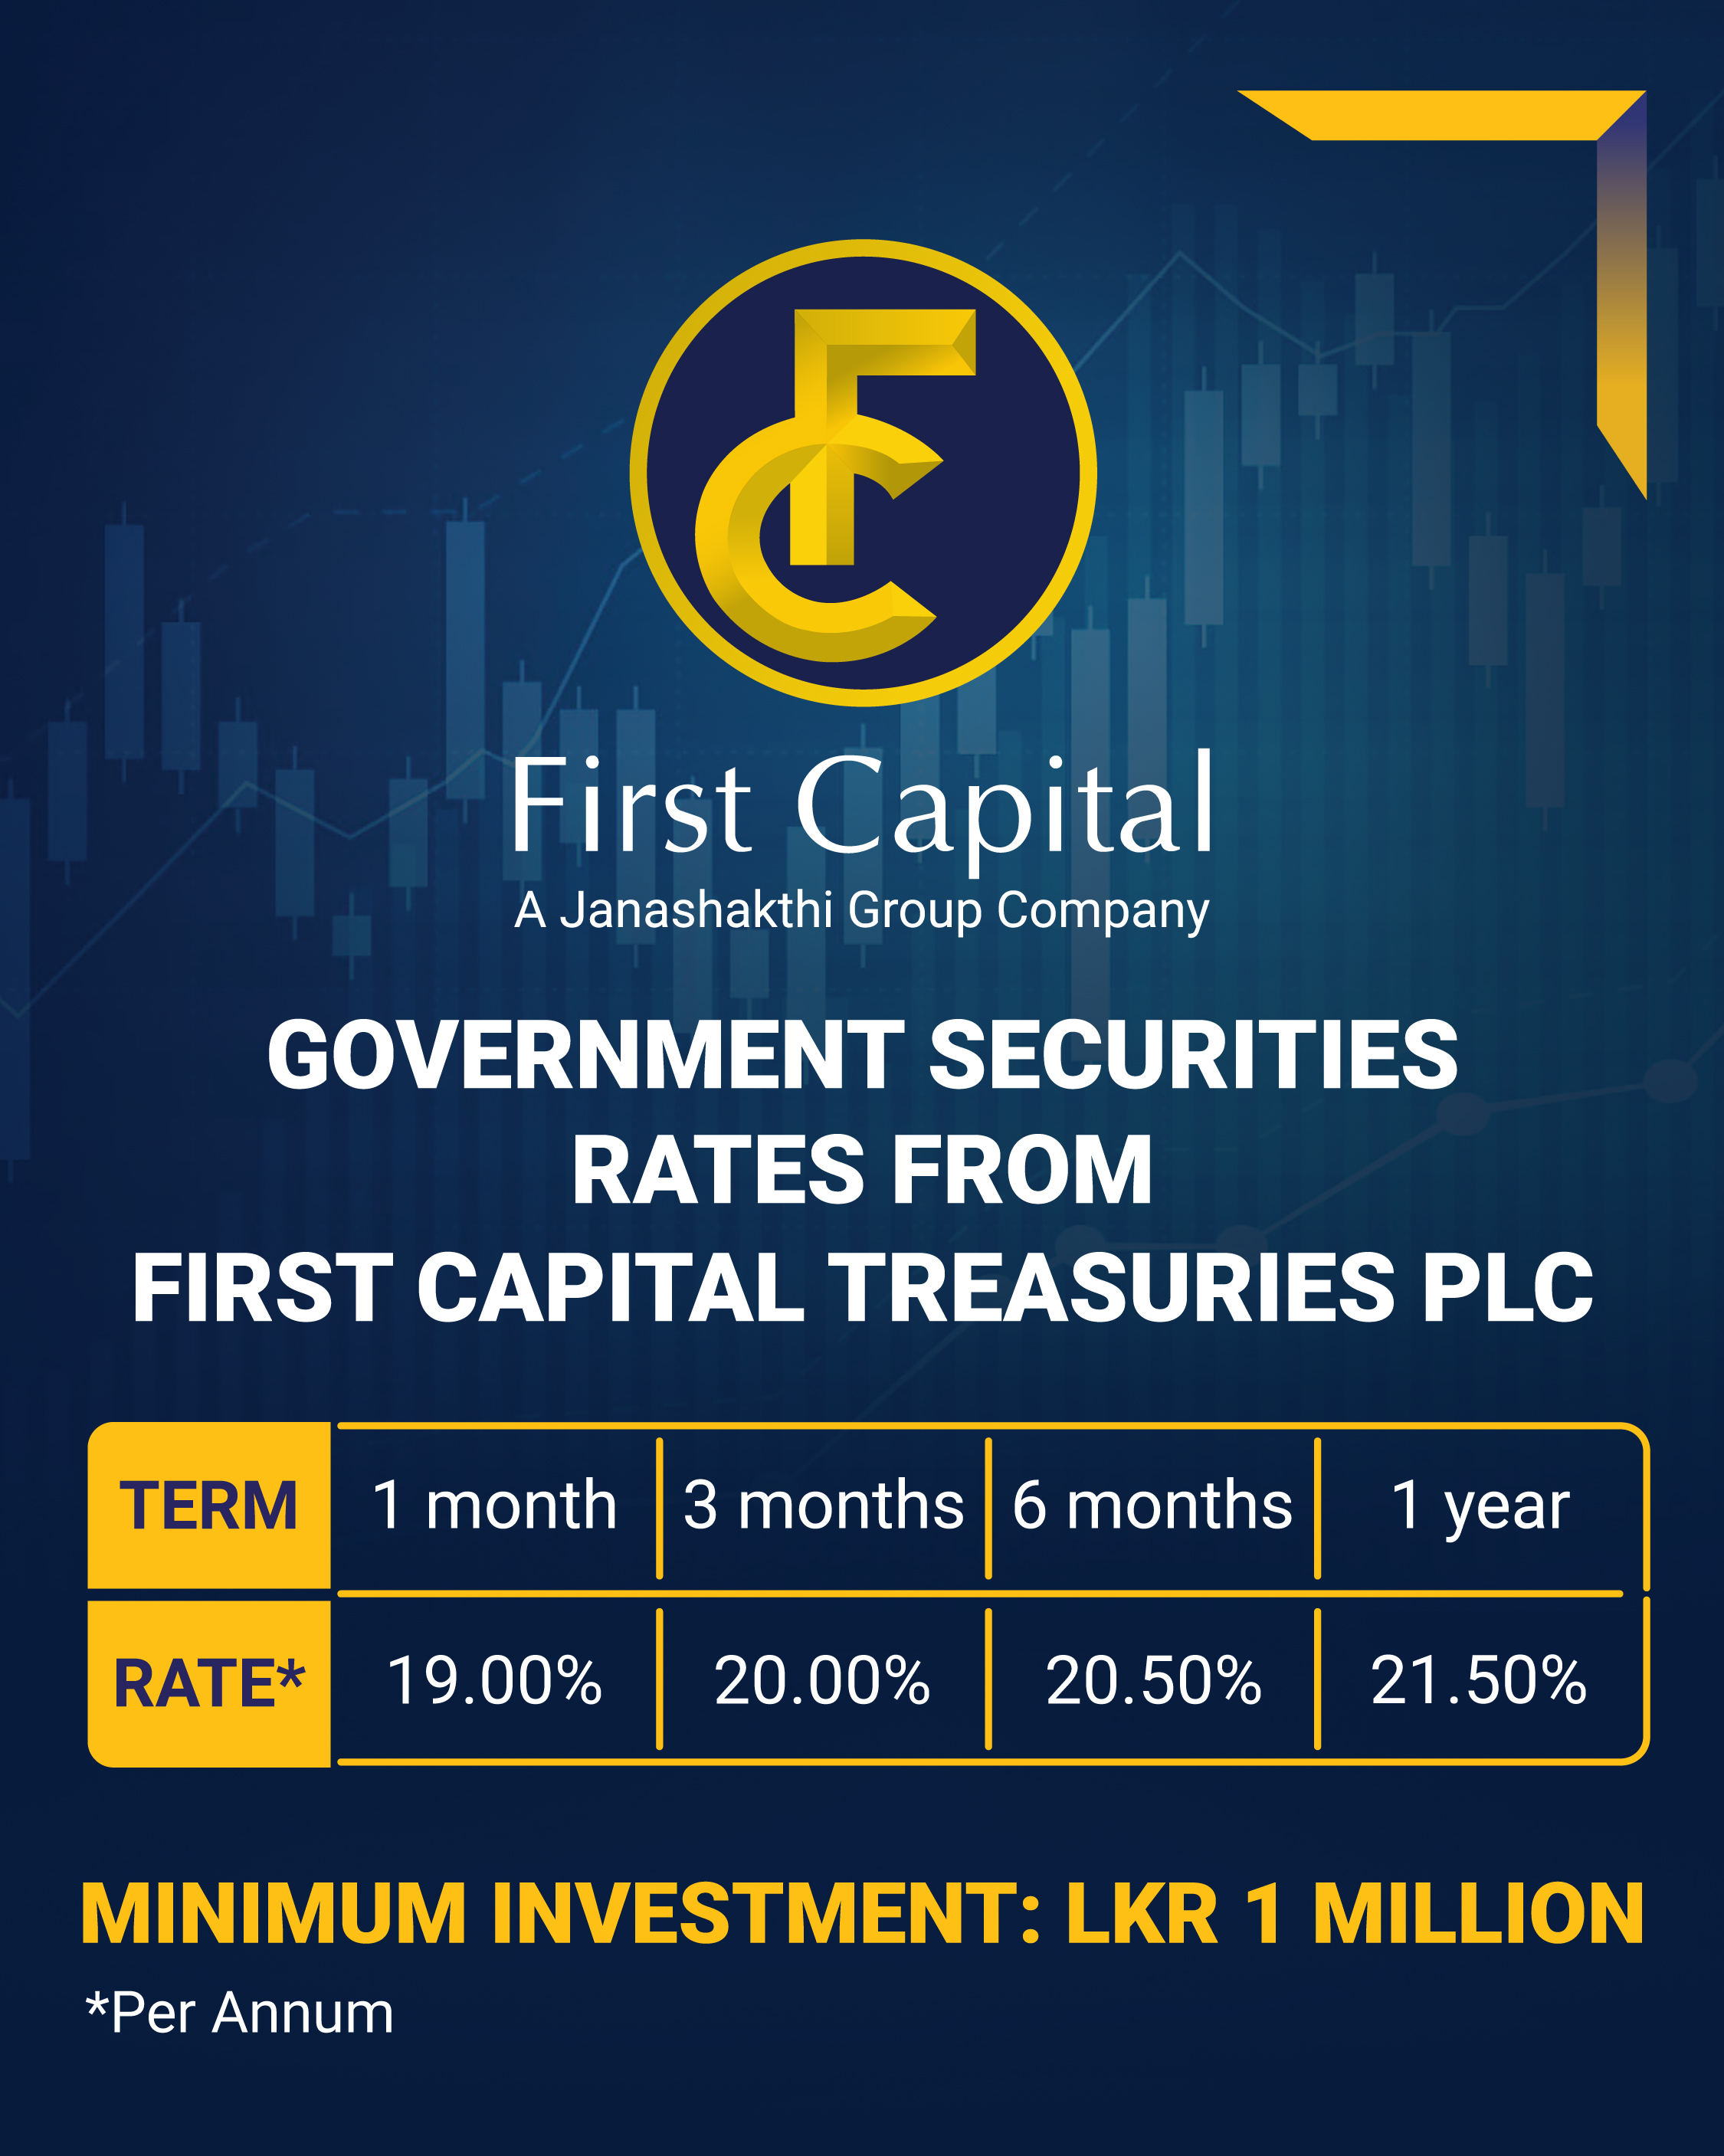 Government Securities Rates from First Capital Treasuries PLC 23 June 22